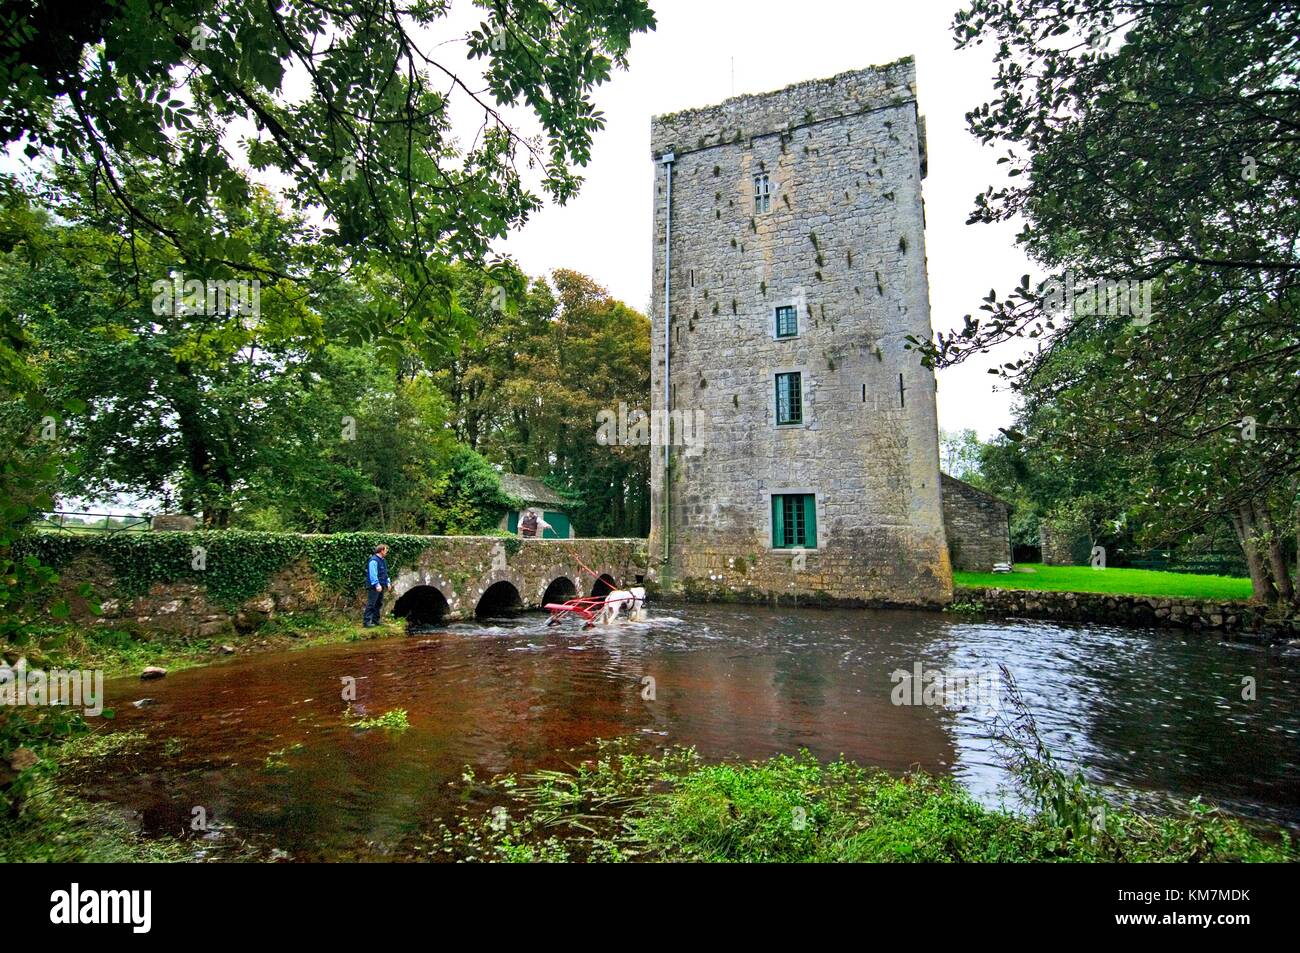 Trotting horses from Ballinasloe Fair refresh in river by Thoor Ballylee, once home of poet W.B.Yeats, near Gort, Galway Ireland Stock Photo